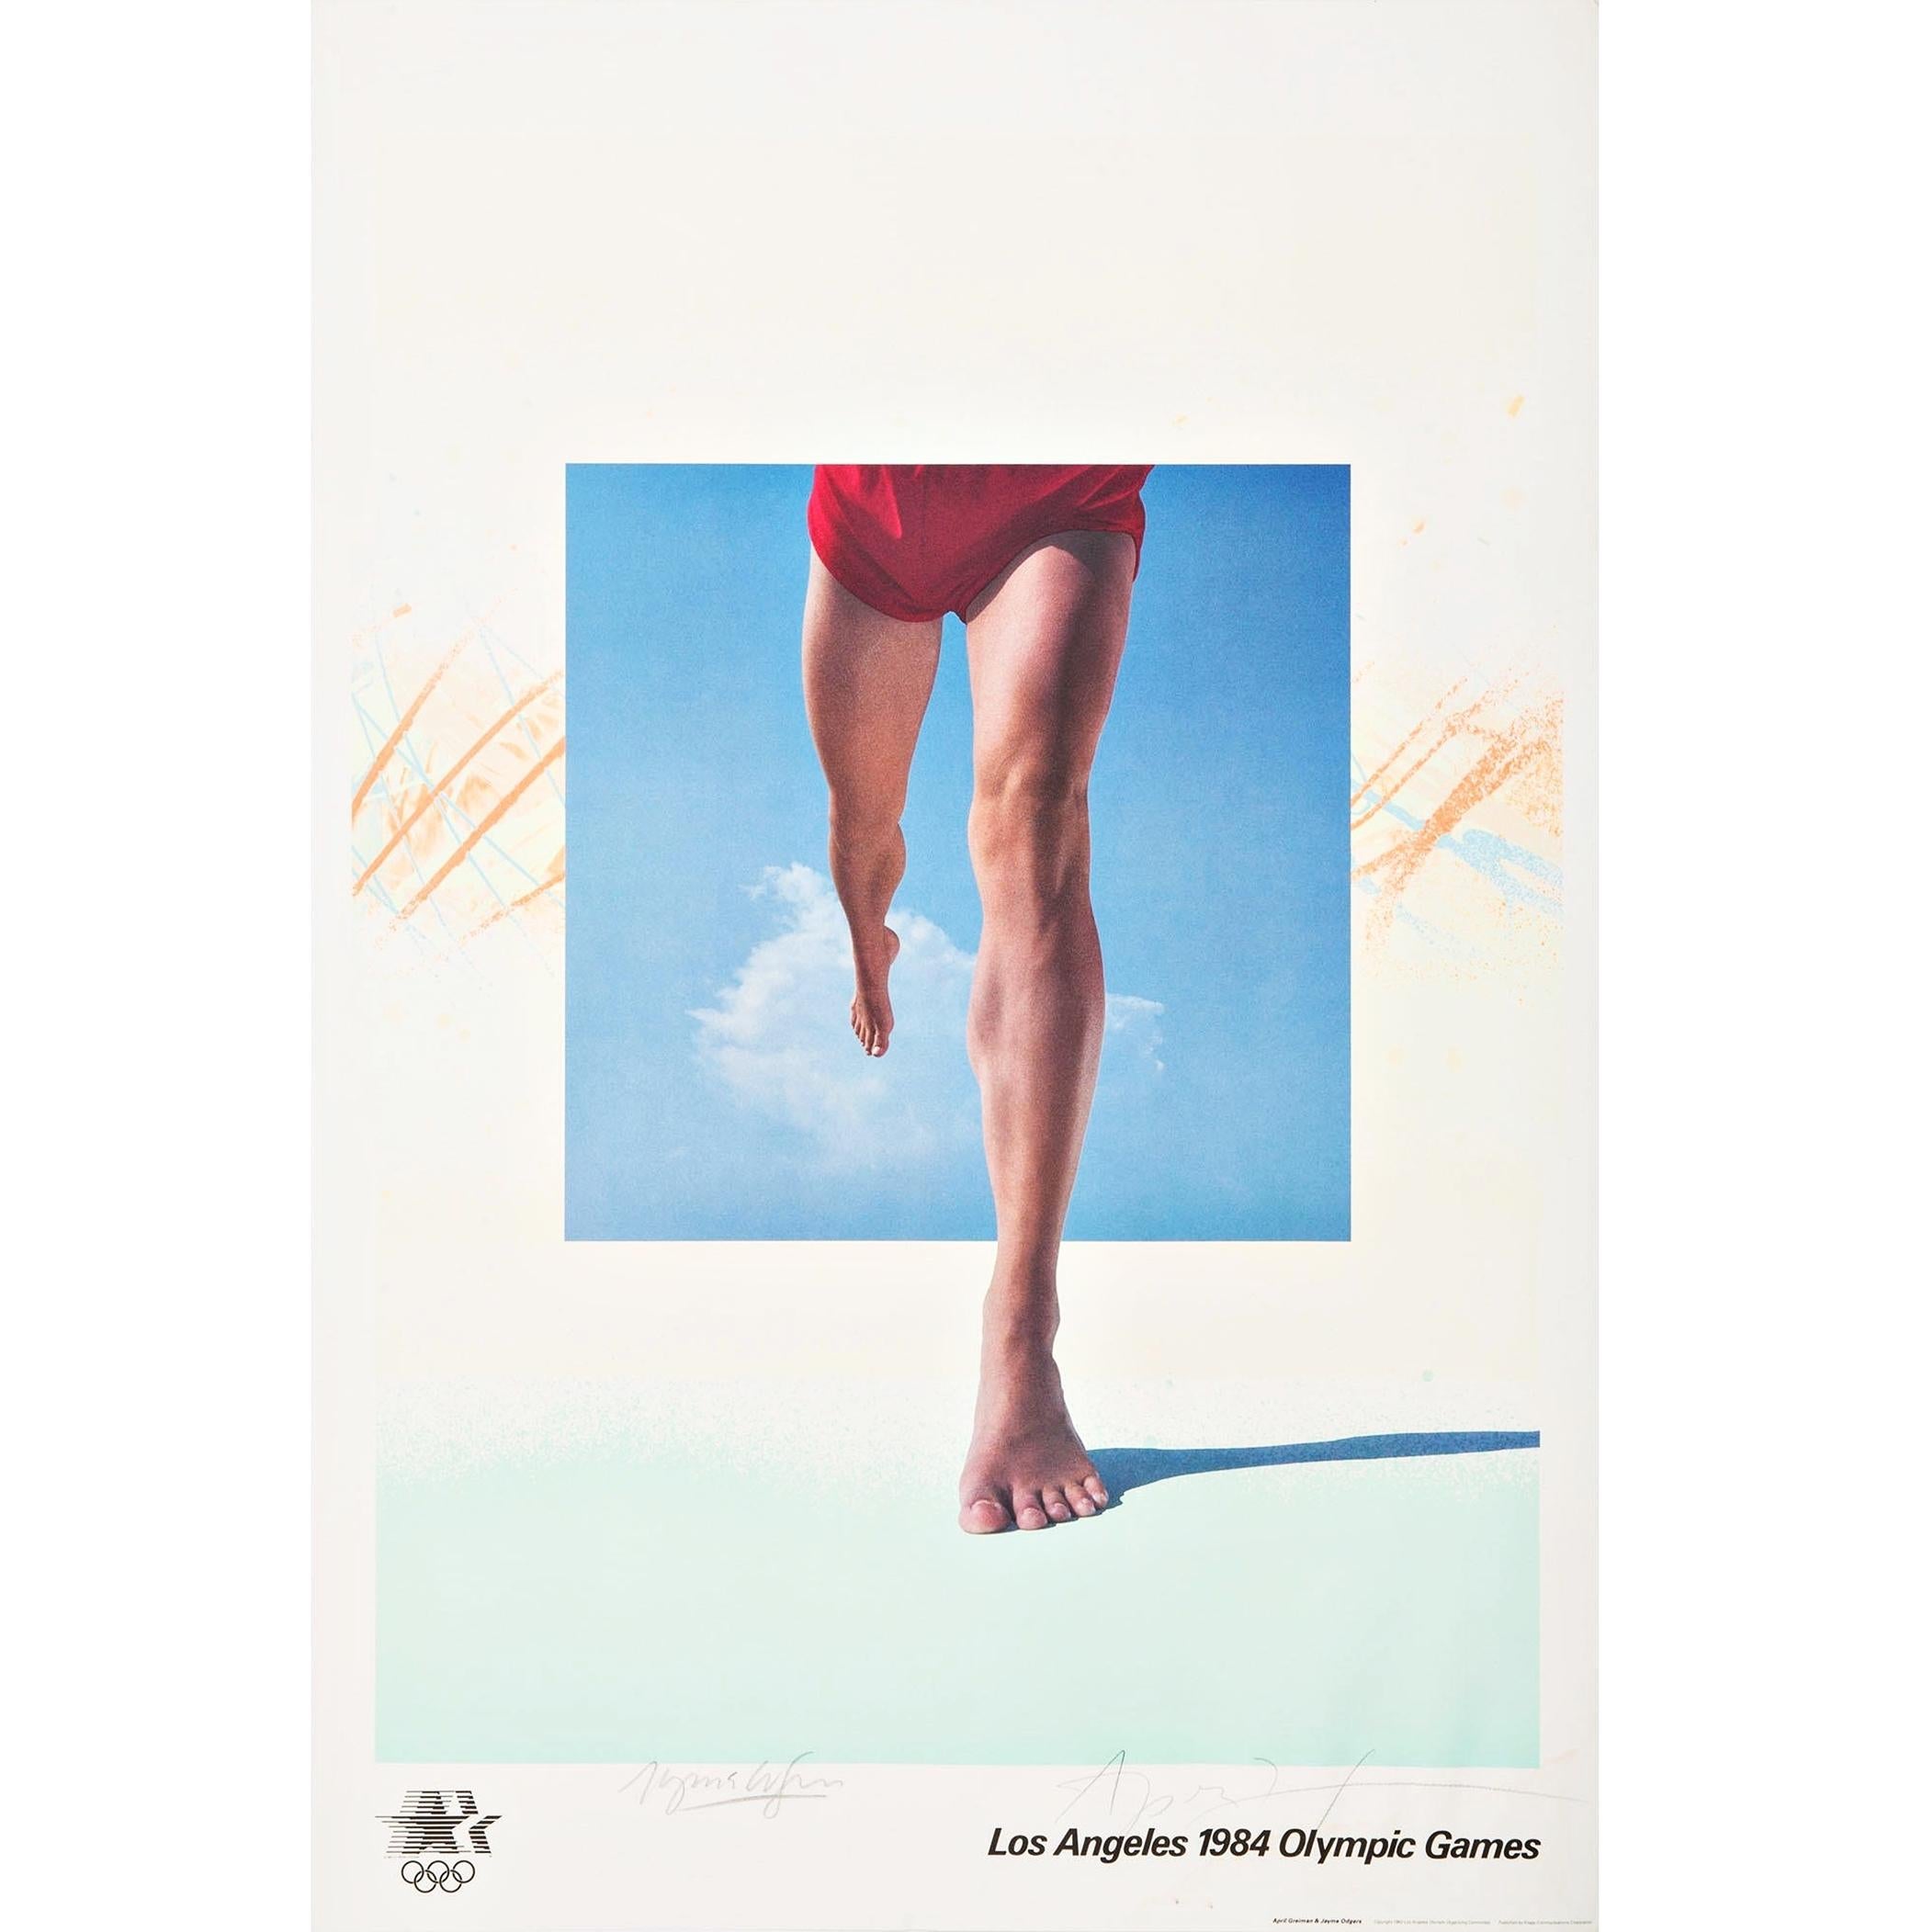  1984 Olympic Games Print (Hand Signed by both April Greiman and Jayme Odgers) For Sale 2